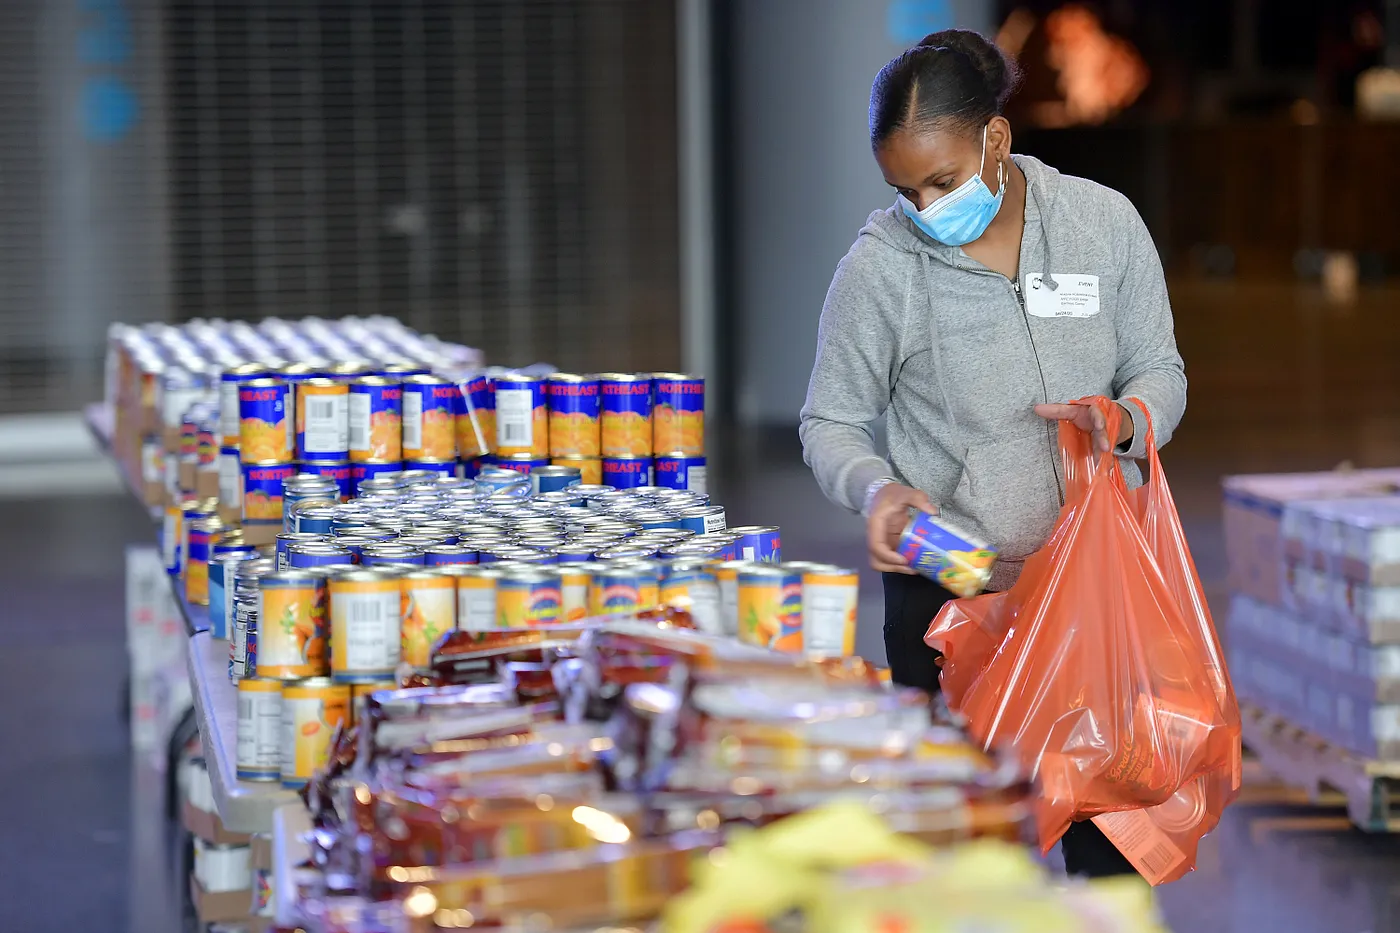 A volunteer packs bags for emergency food distribution during the COVID-19 pandemic